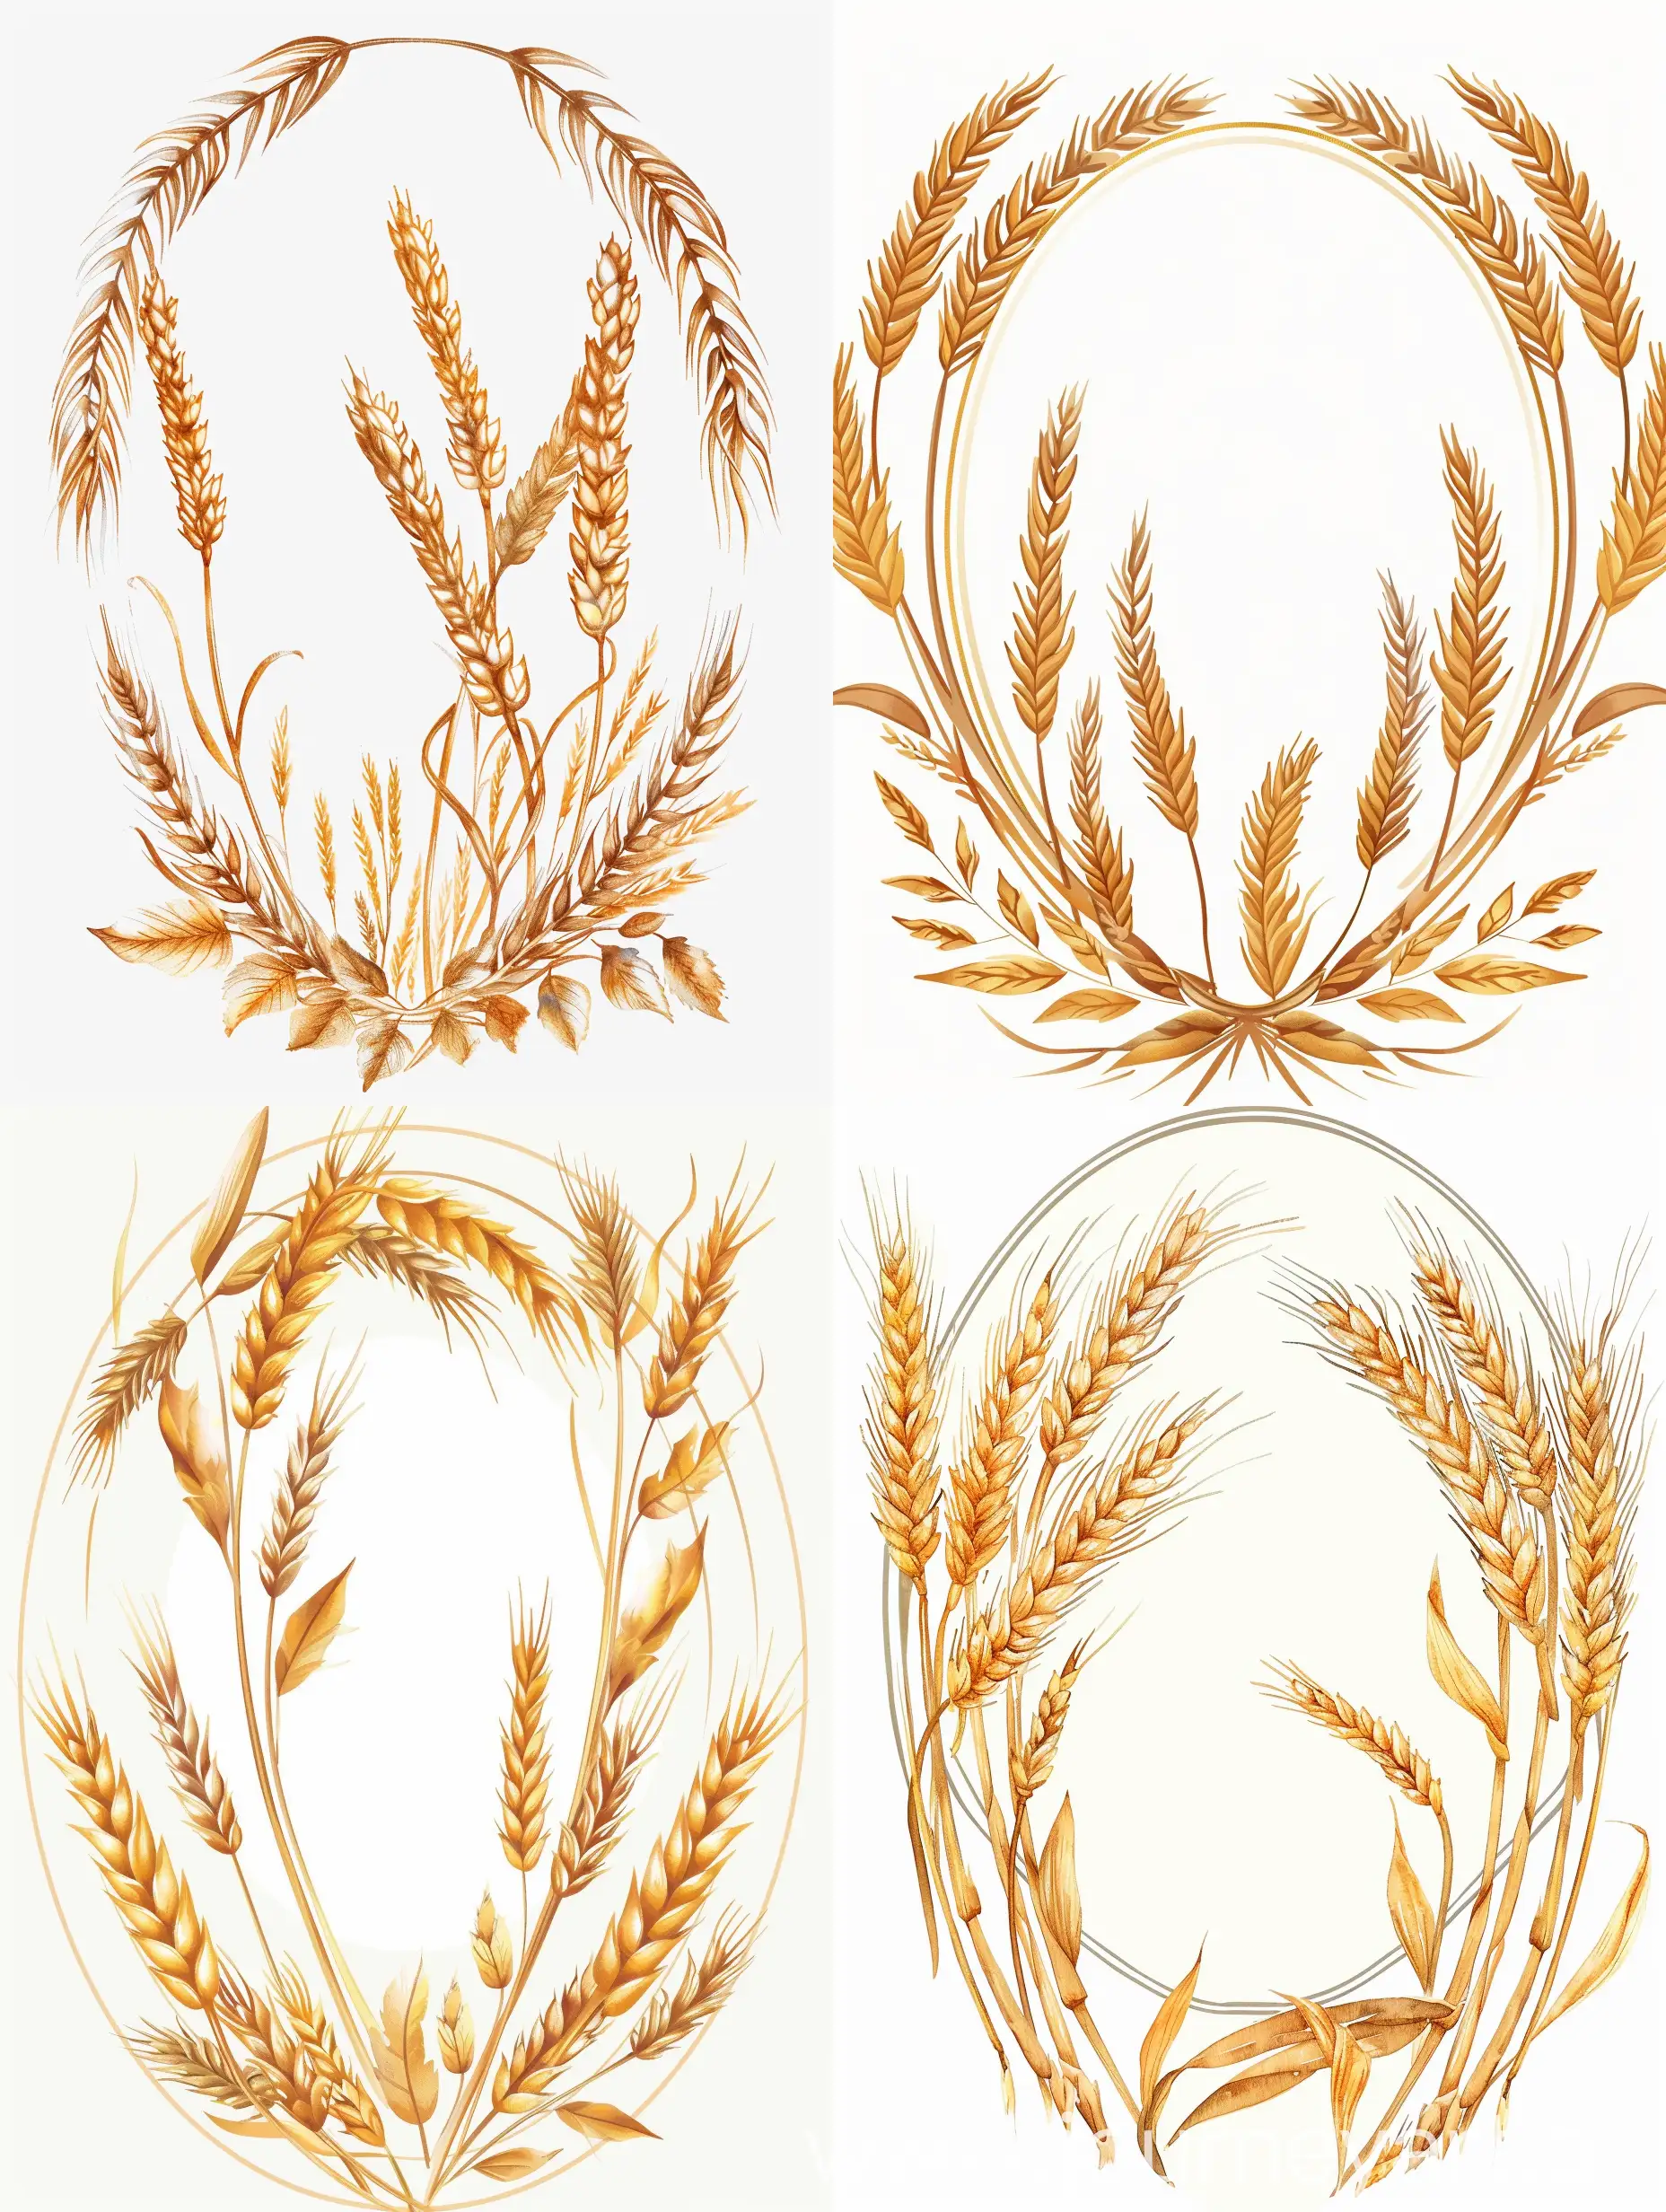 Wheat-Field-Oval-Frame-Illustration-on-White-Background